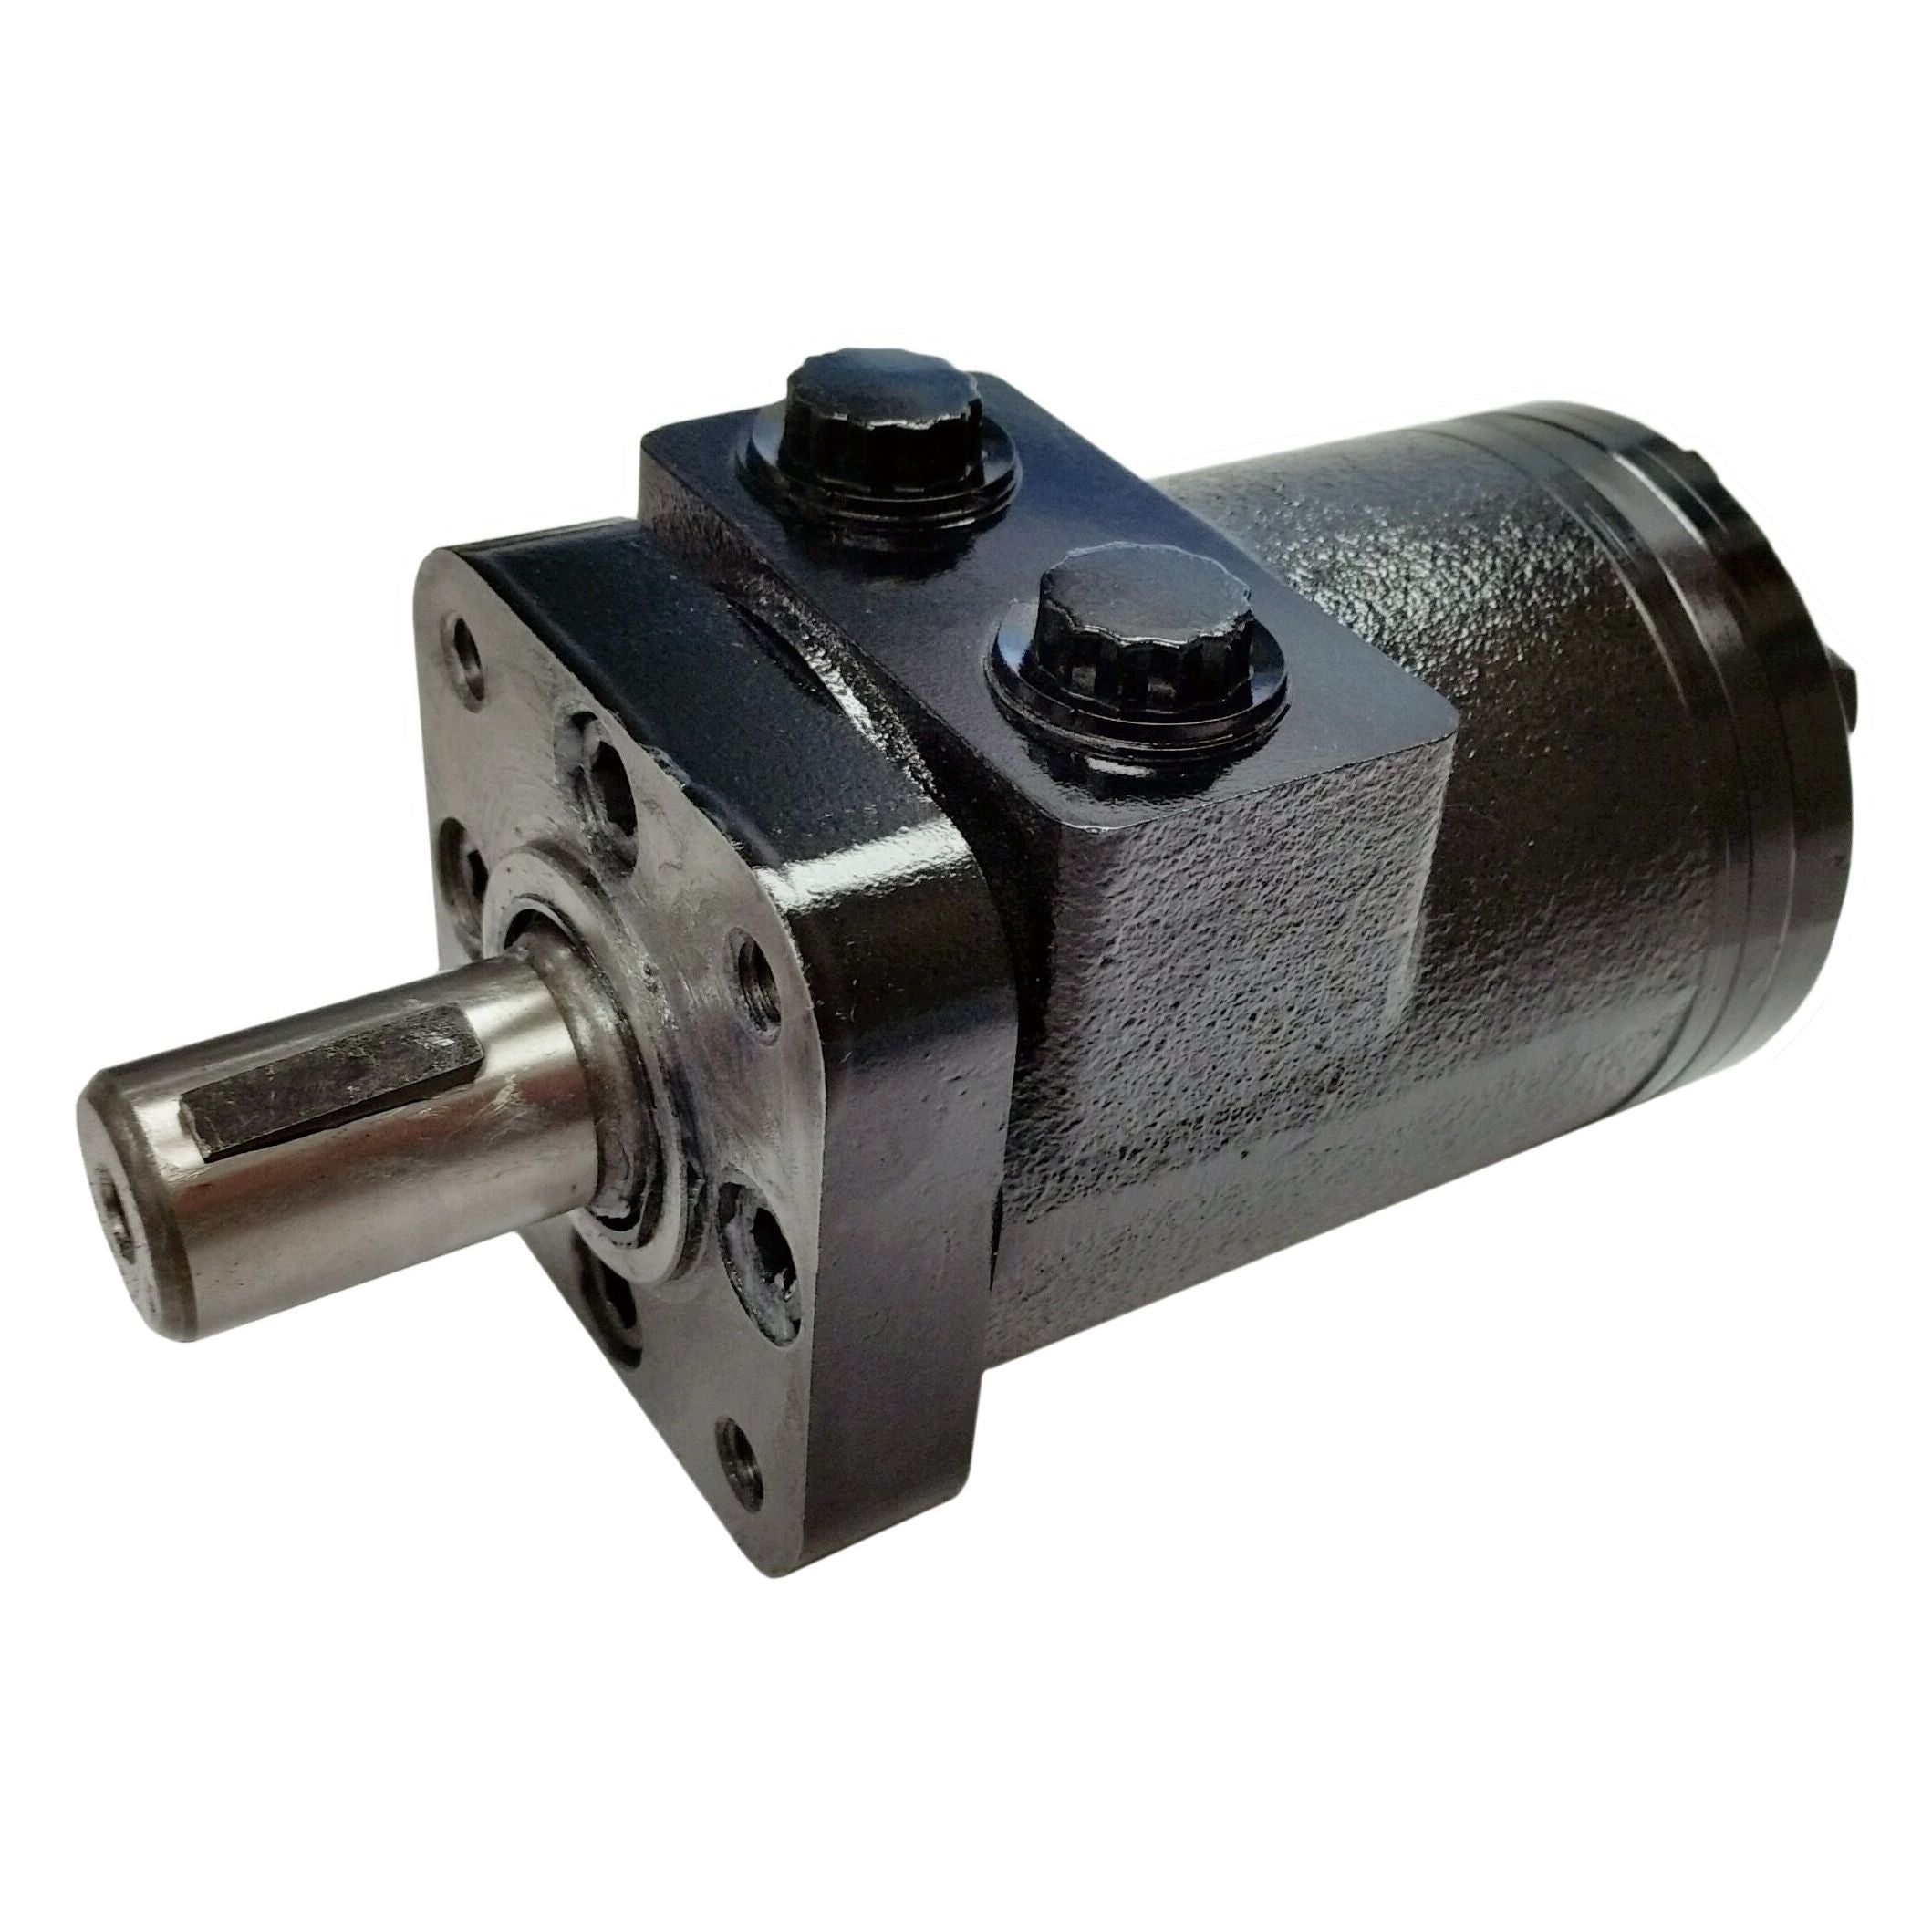 BMPH-250-H4-K-P : Dynamic LSHT Motor, 240cc, 250RPM, 3363in-lb, 2031psi Differential, 15.85GPM, SAE A 4-Bolt Mount, 1" Bore x 1/4" Key Shaft, Side Ported, 1/2" NPT